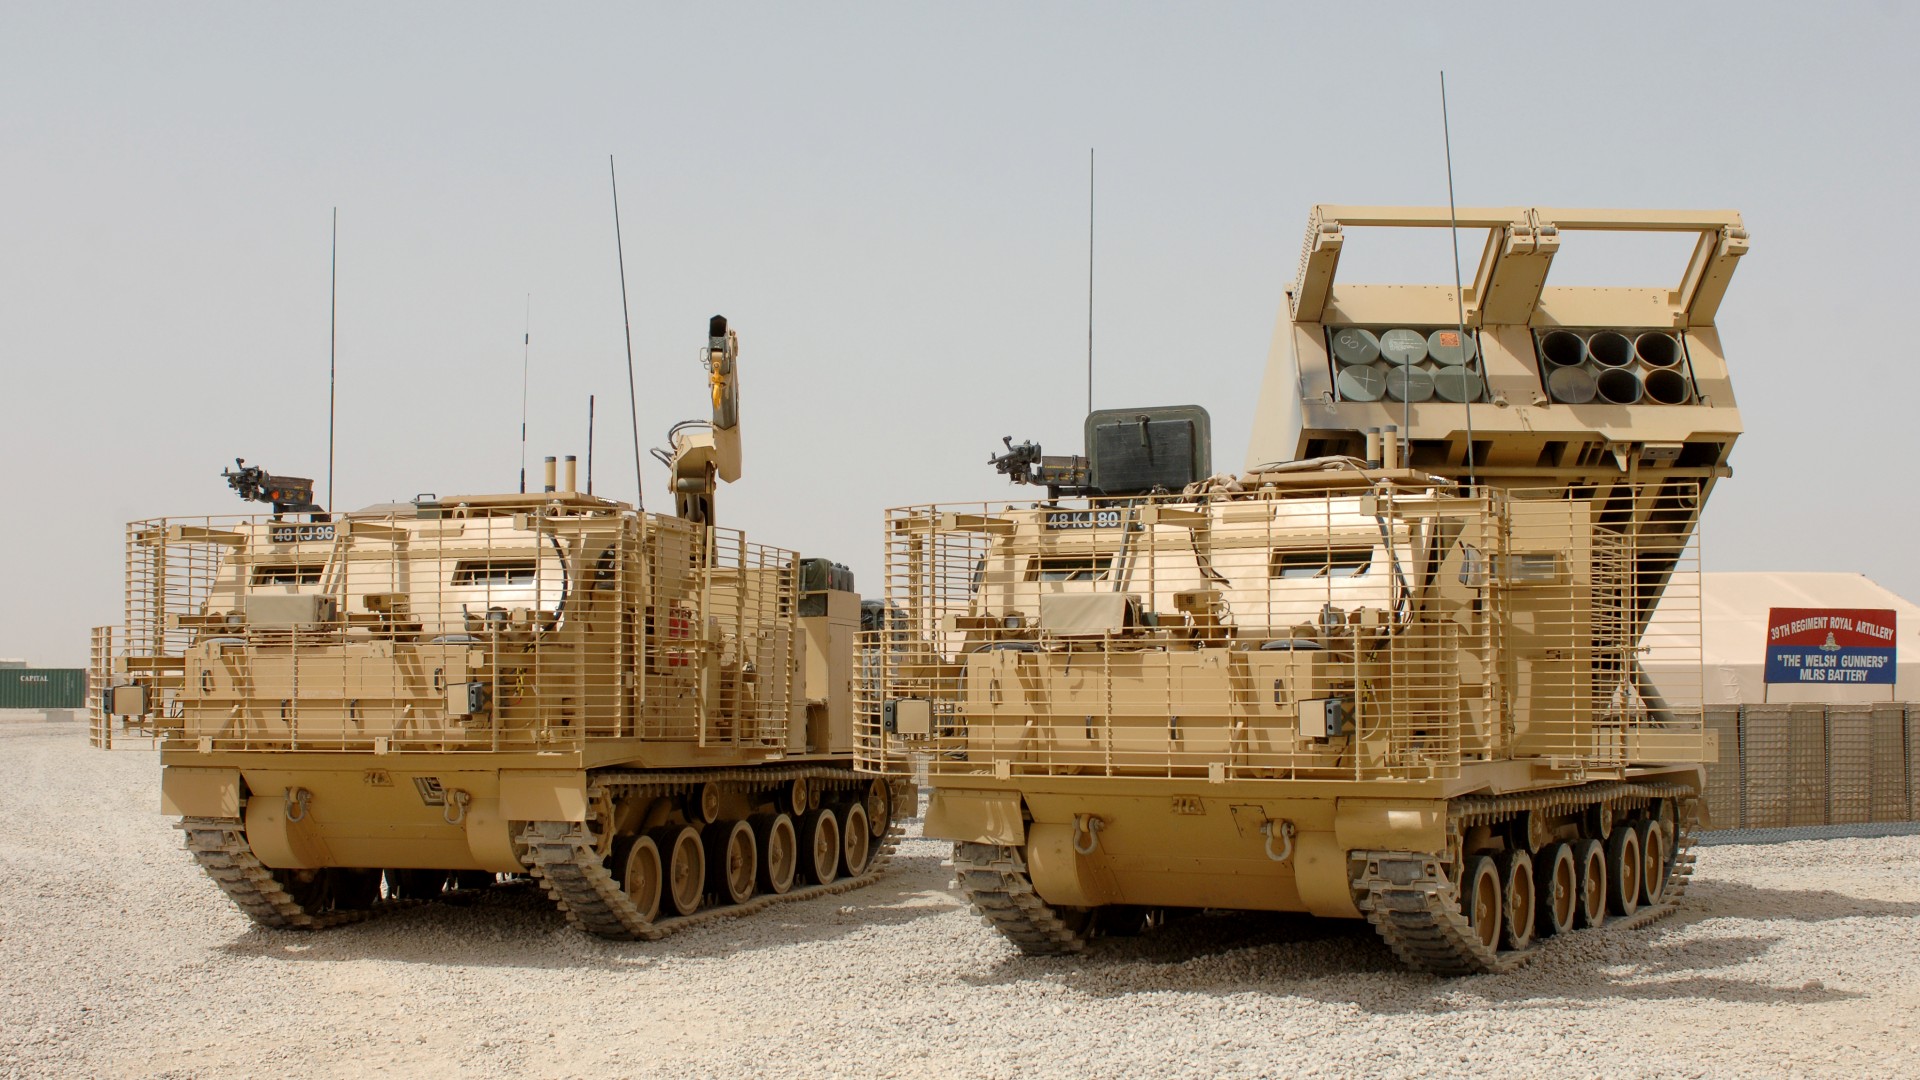 MLRS, M270, Multiple Launch Rocket System, missile, U.S. Army, Afghanistan, M270A1 (horizontal)